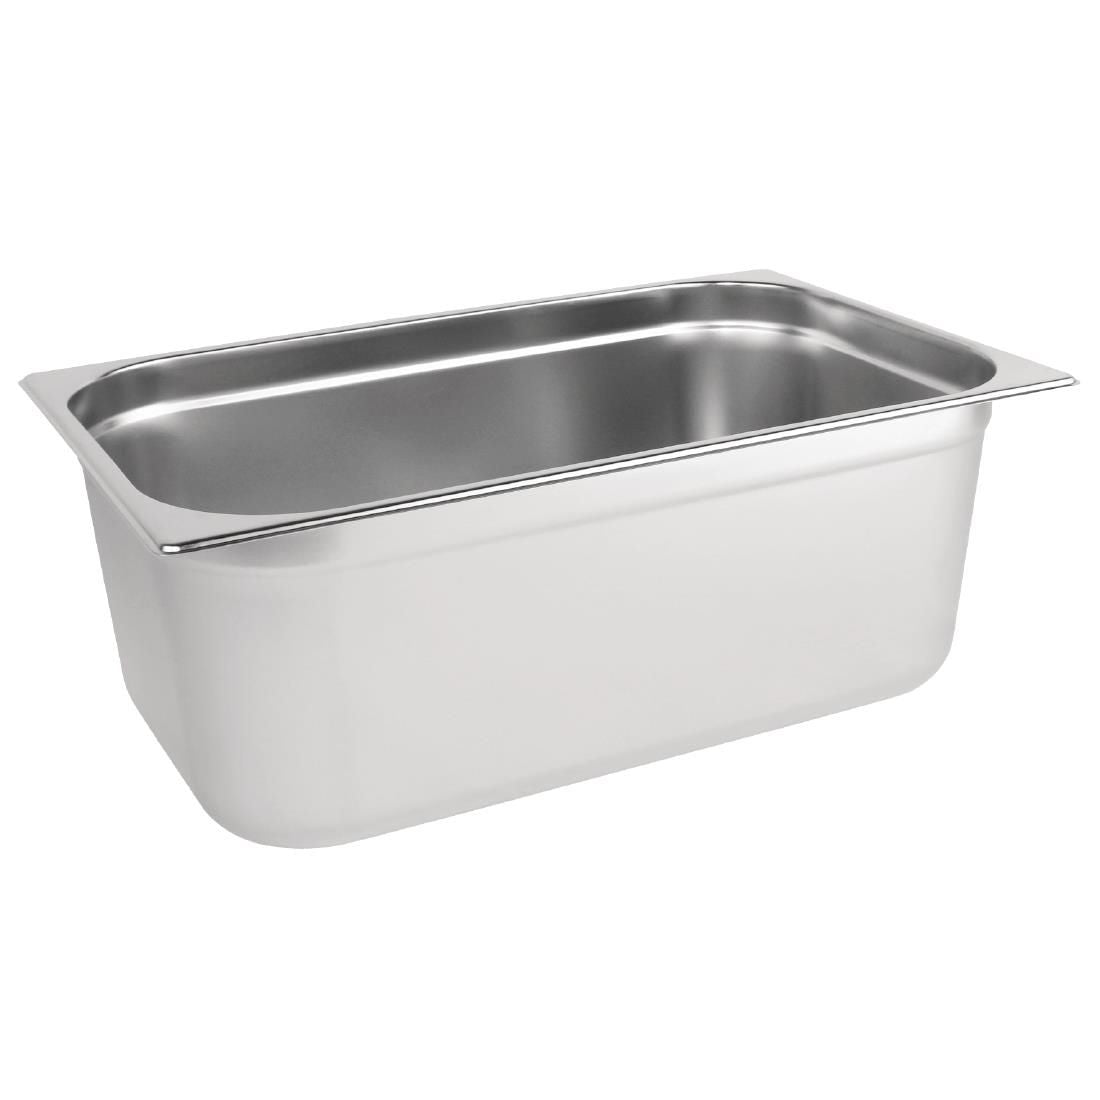 K918 Vogue Stainless Steel 1/1 Gastronorm Pan 200mm